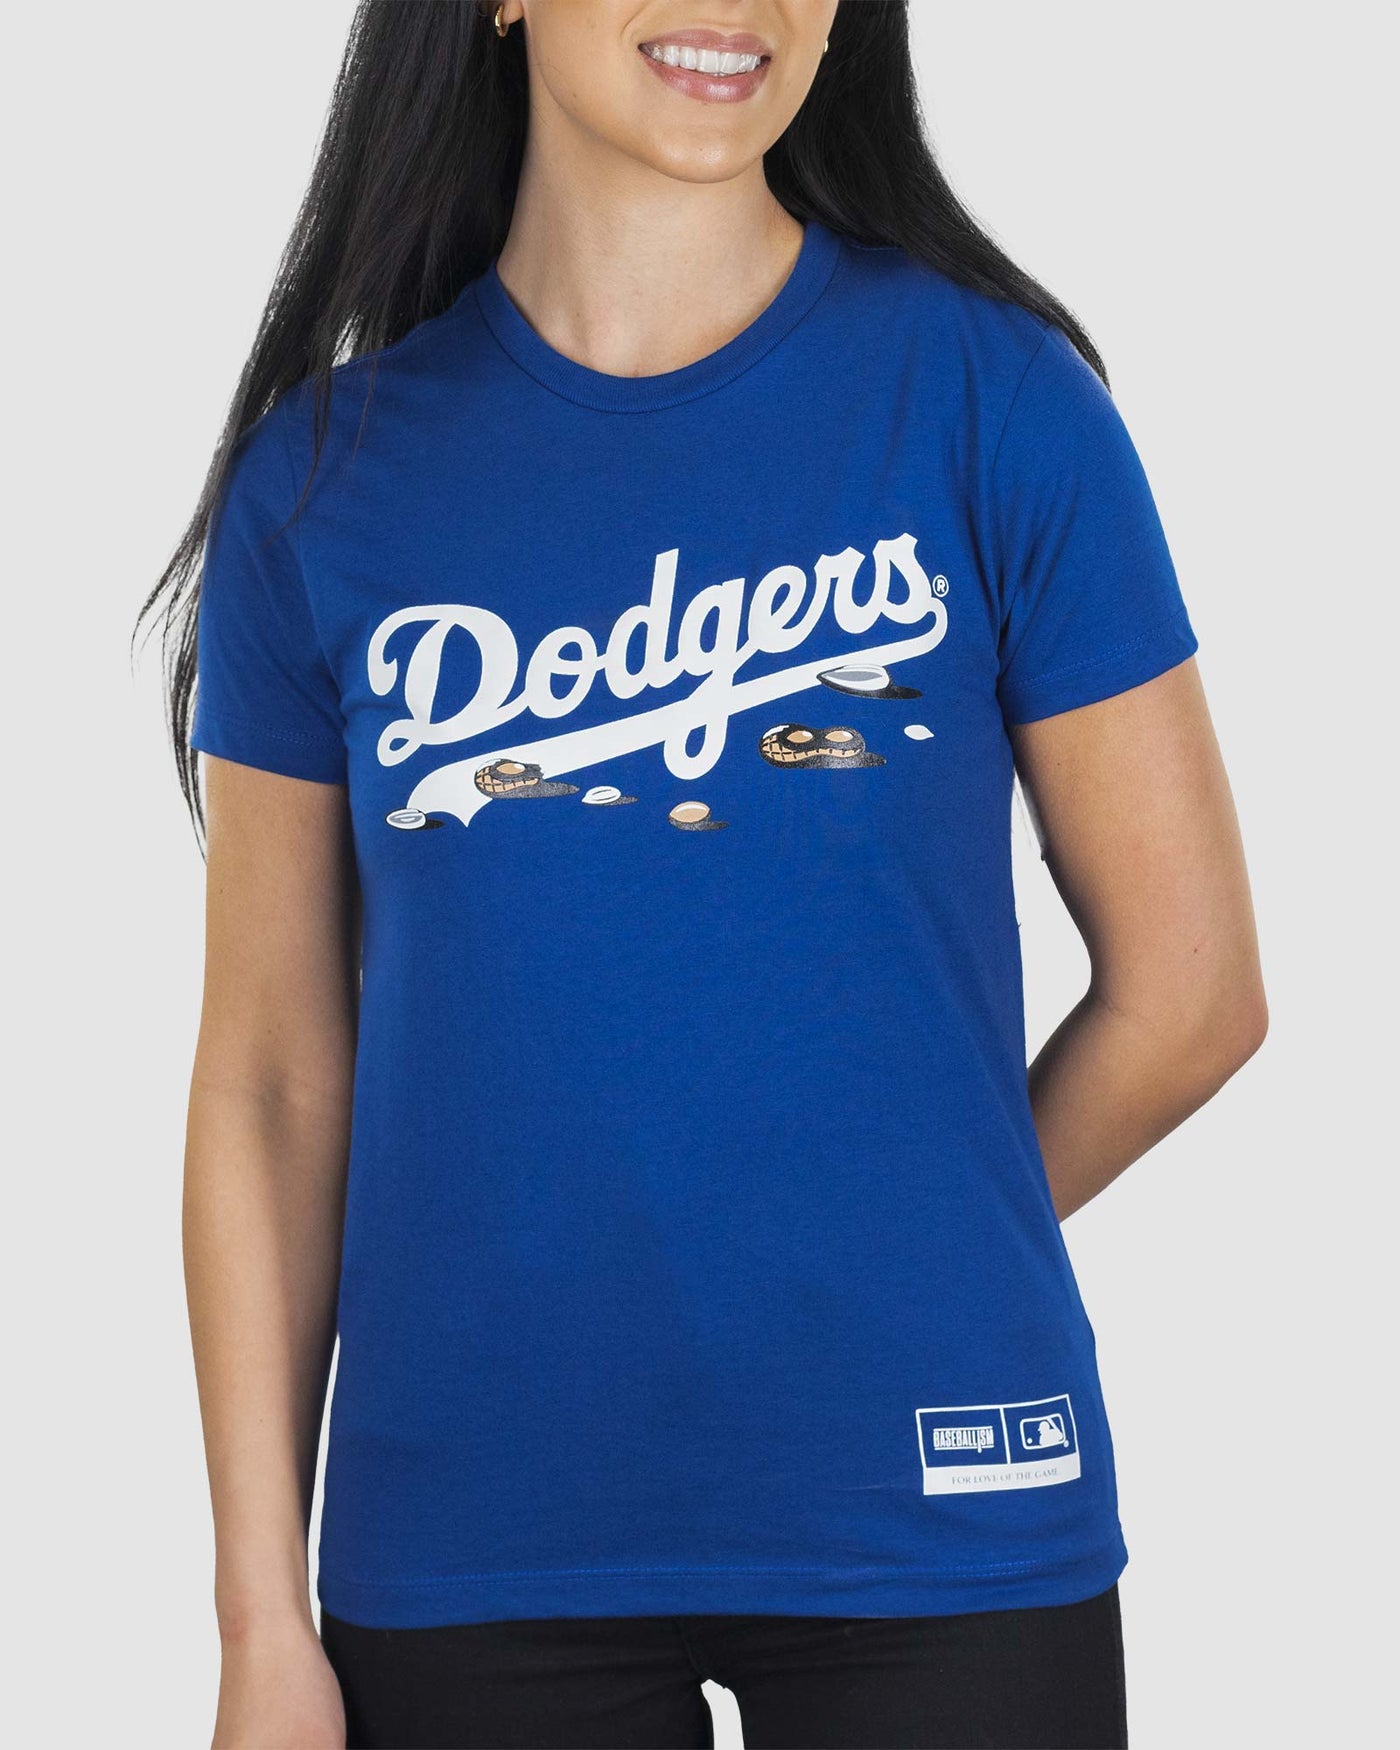 Get Your Peanuts! Women's Warm-Up Tee - Los Angeles